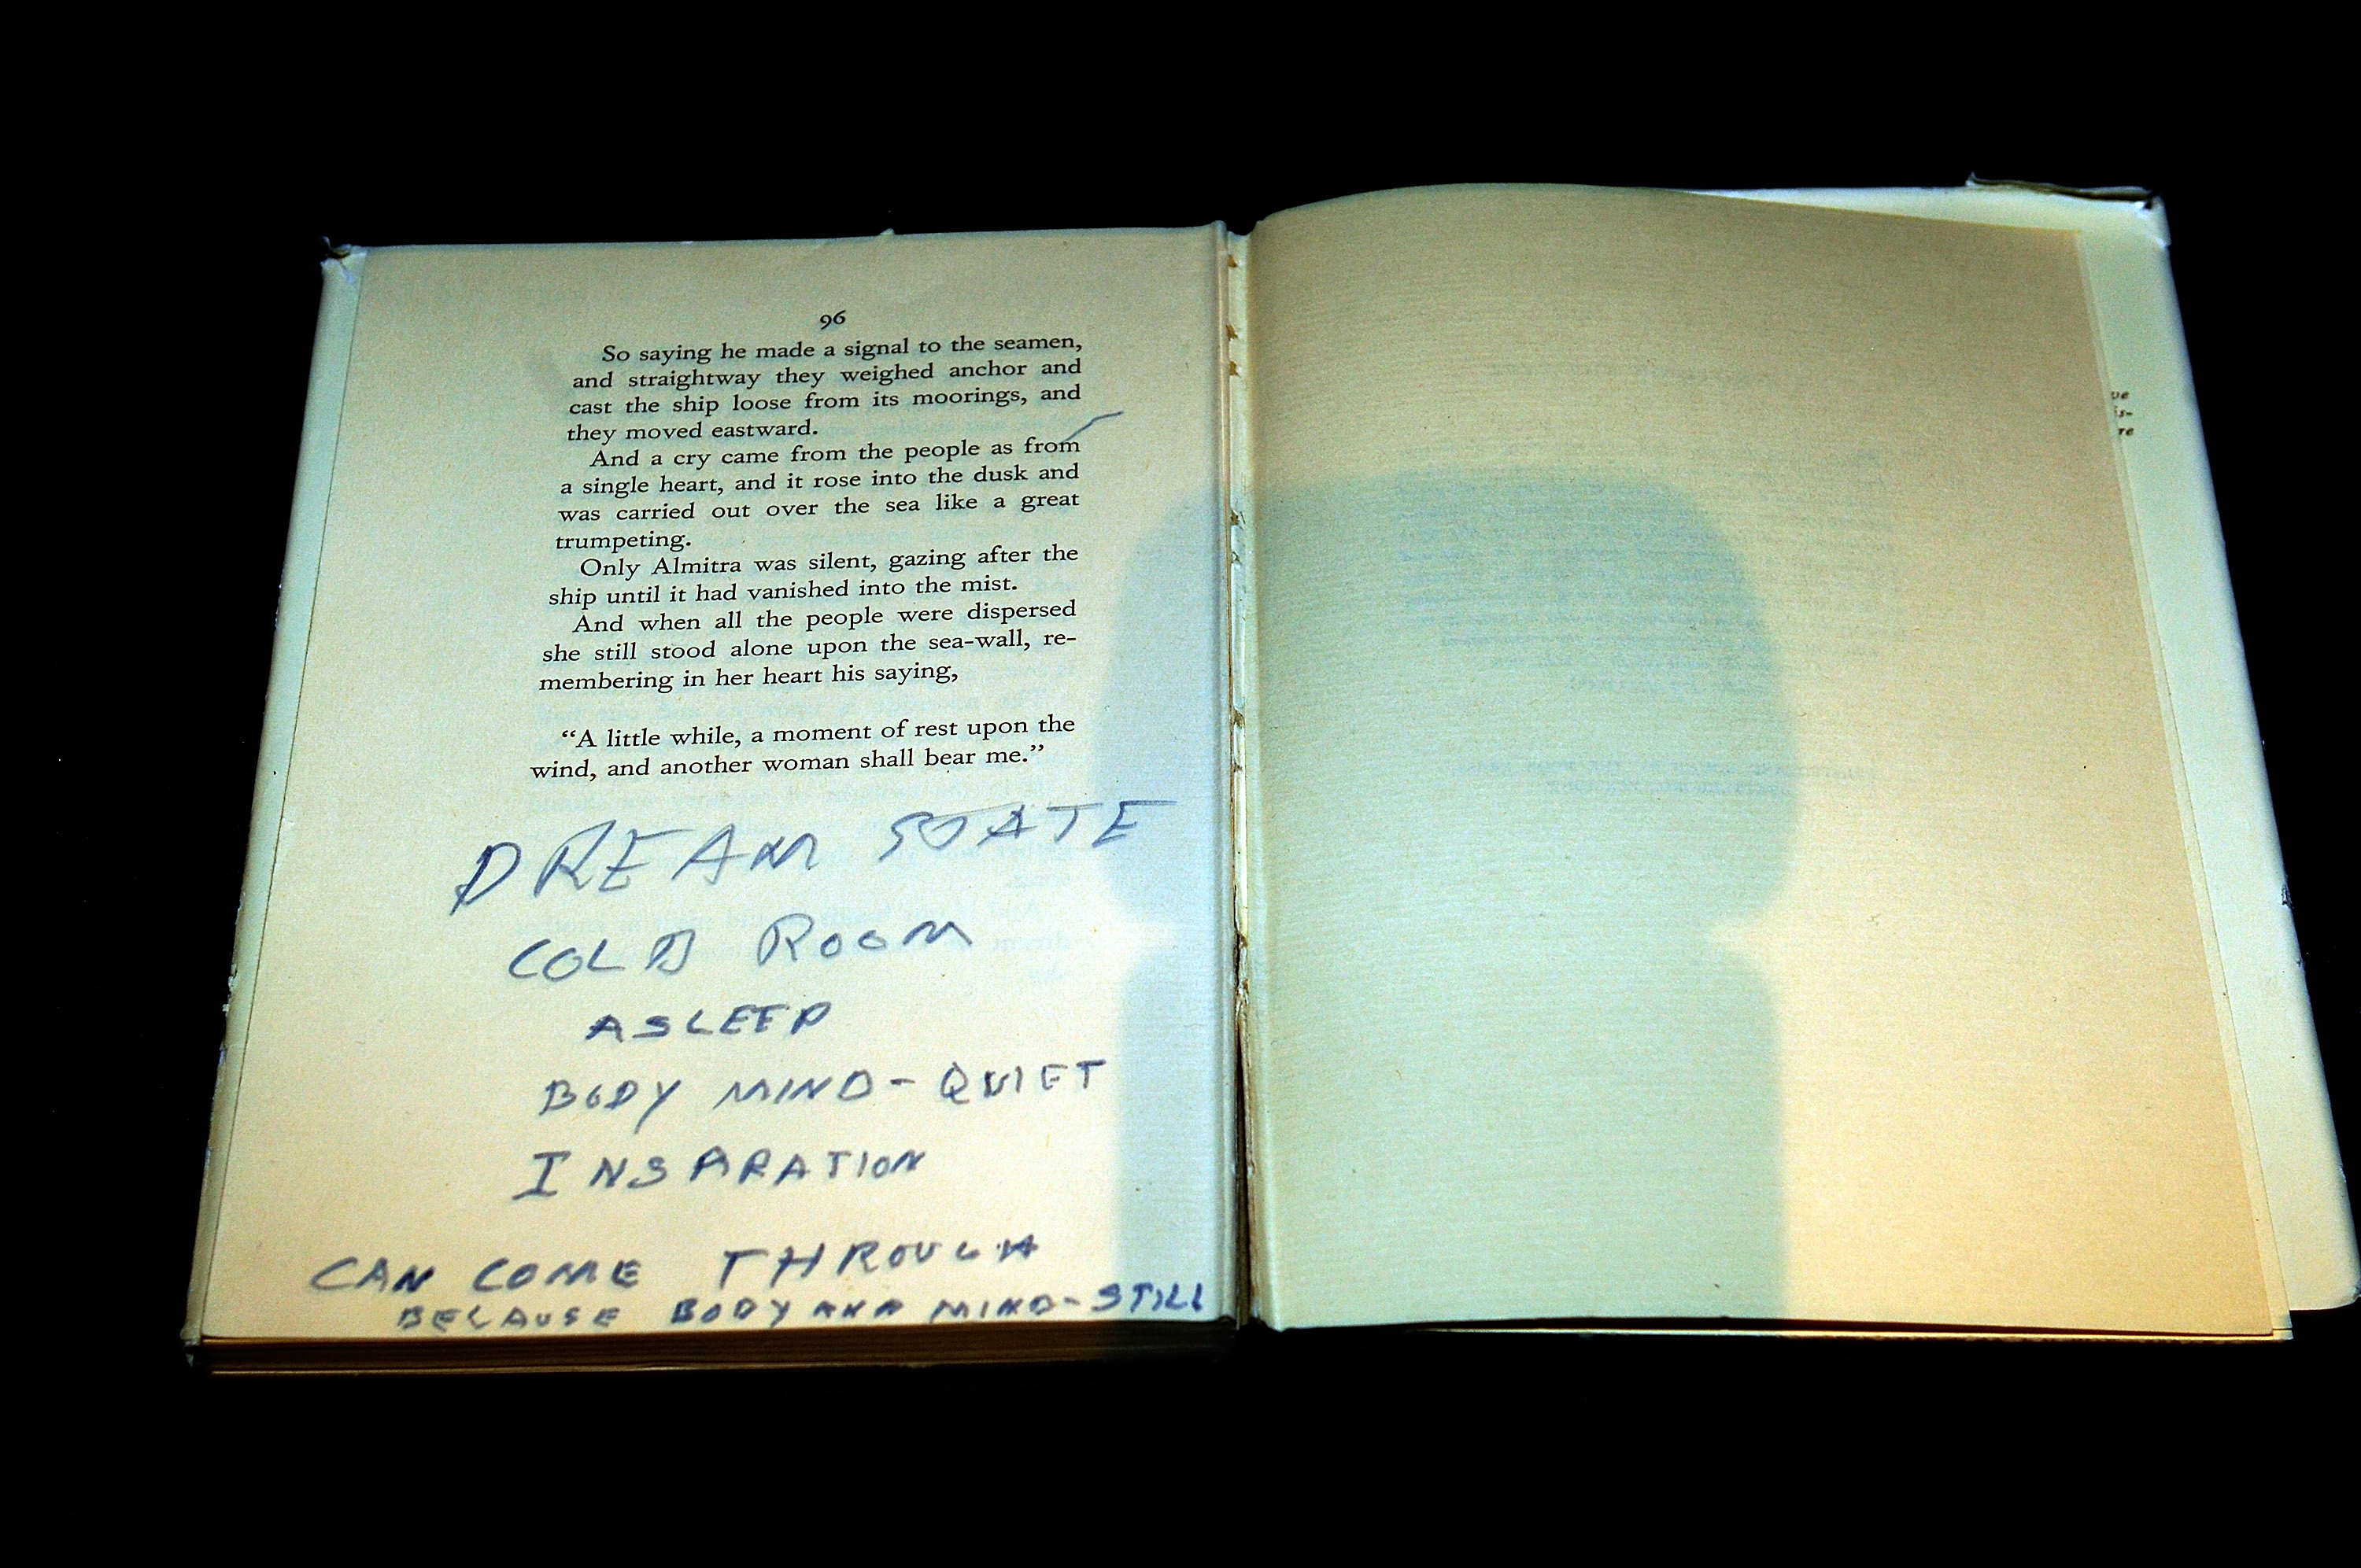 Elvis Presley’s copy of Kahlil Gibran’s The Prophet with his notes